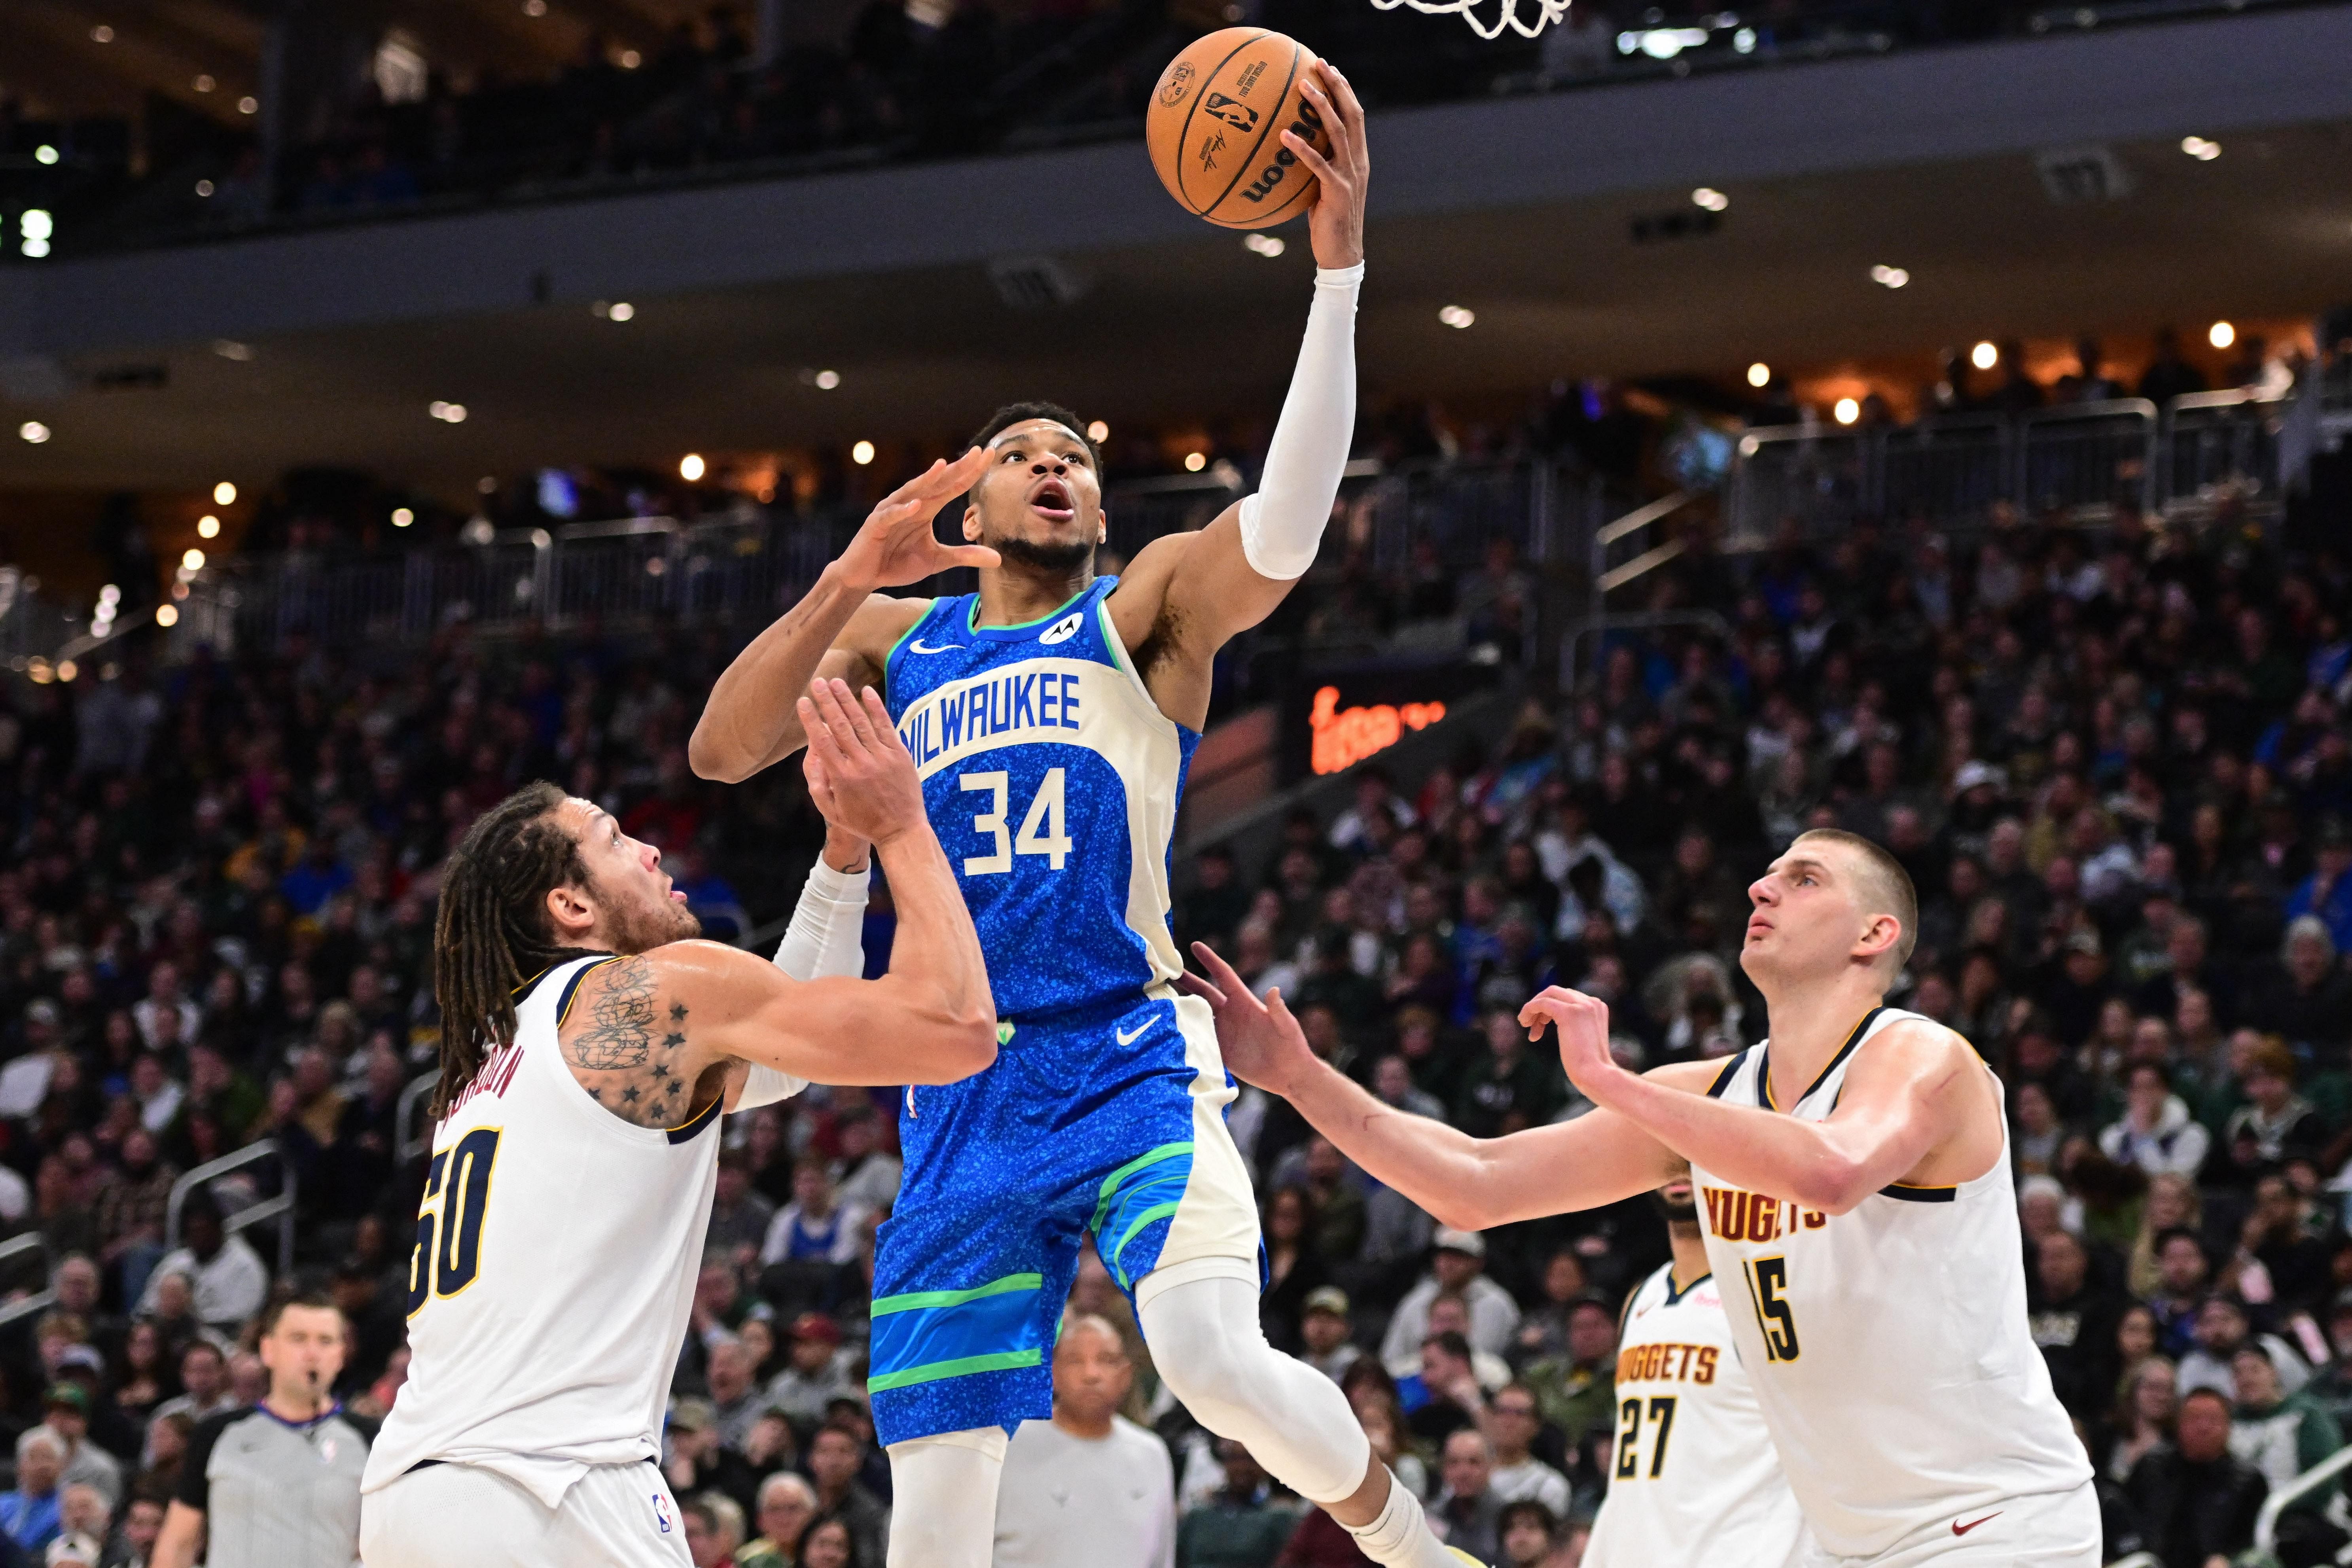 Milwaukee Bucks rip Denver Nuggets, Cleveland Cavaliers' win streak ends and Wemby goes wild